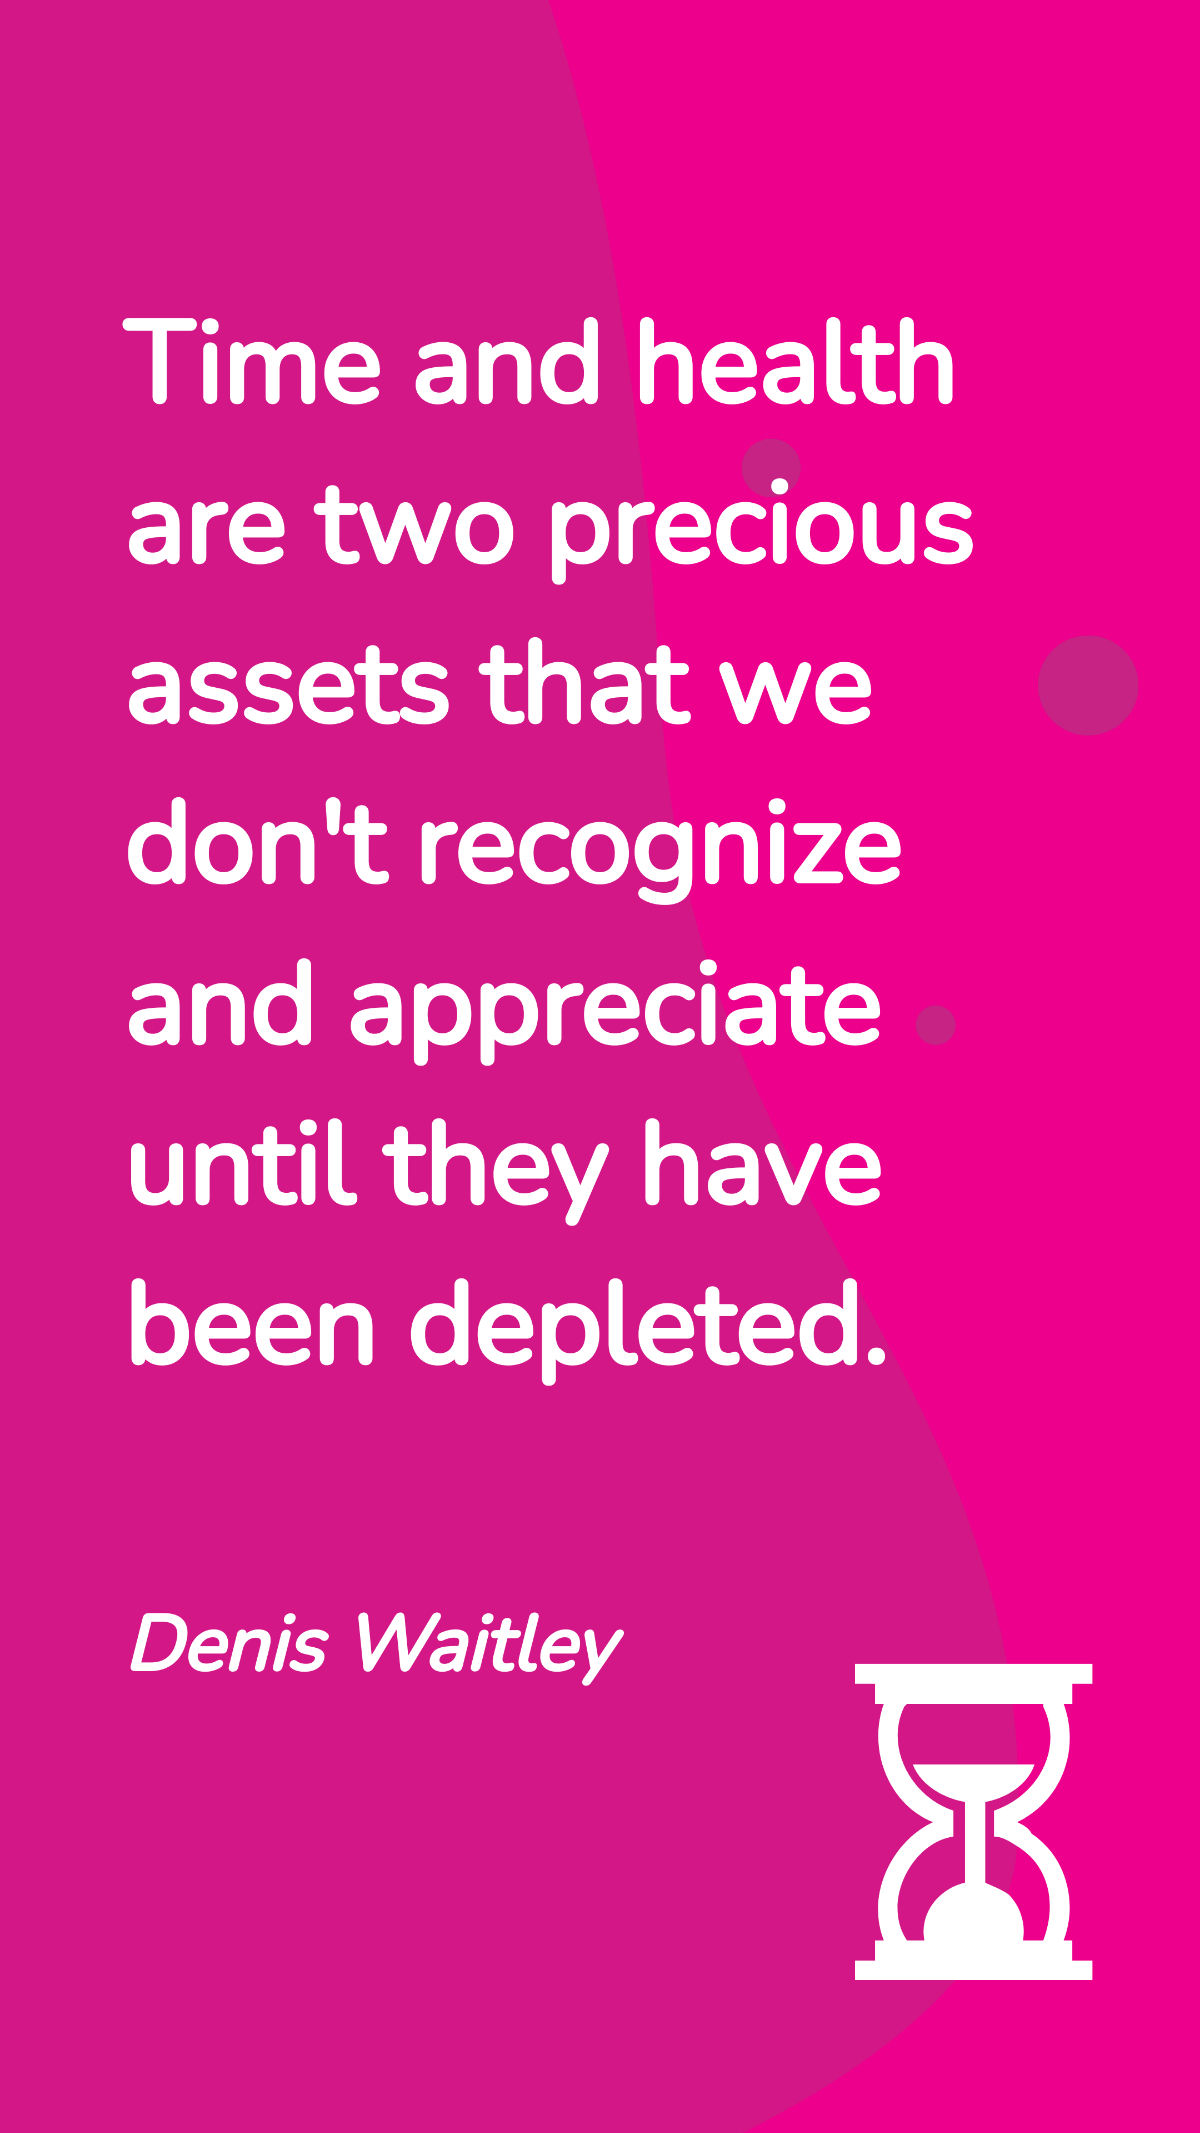 Denis Waitley - Time and health are two precious assets that we don't recognize and appreciate until they have been depleted. Template